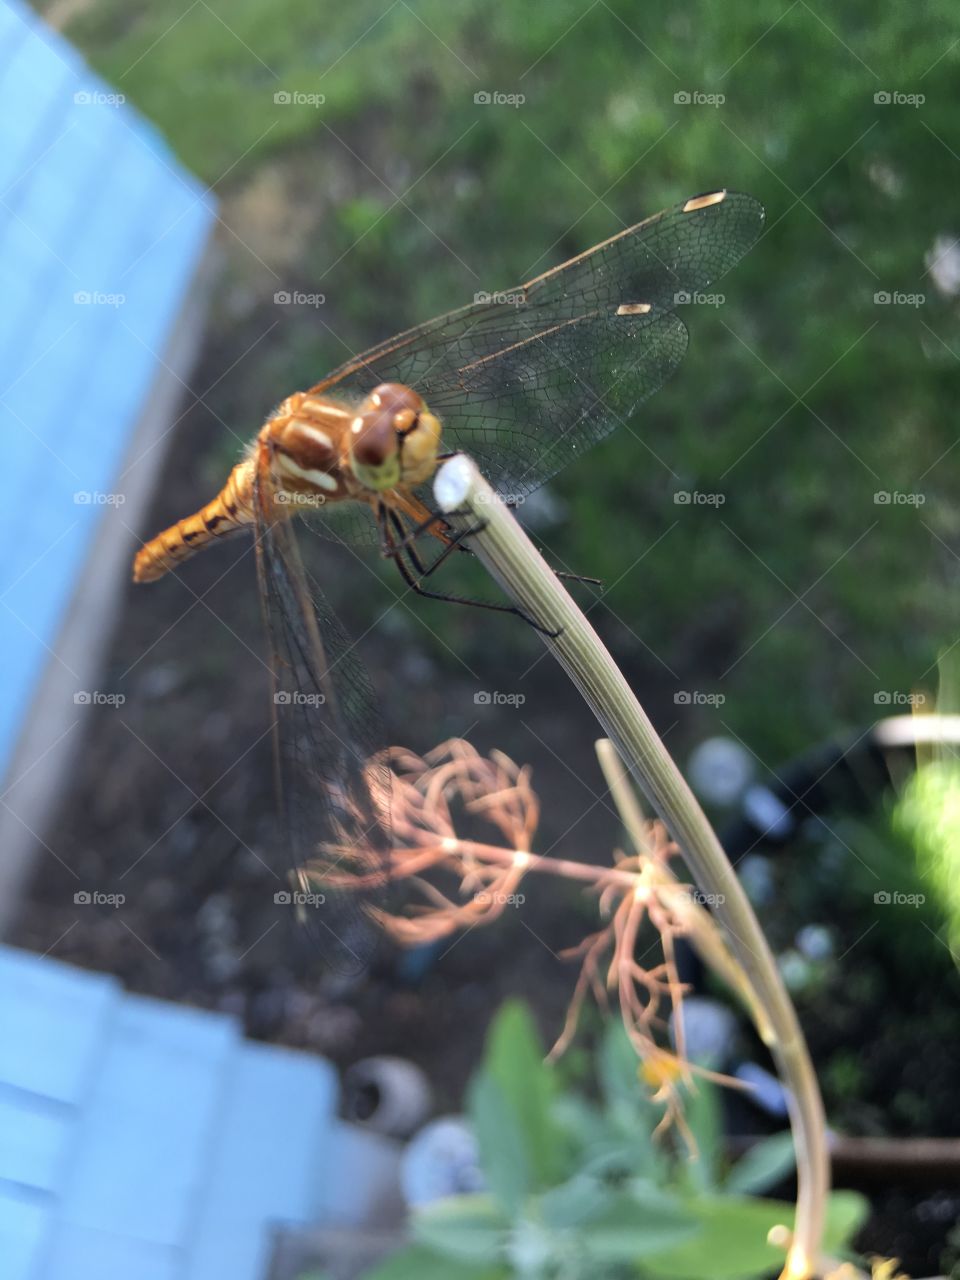 Dragon fly on a stem, on warm summer afternoon  🦋 